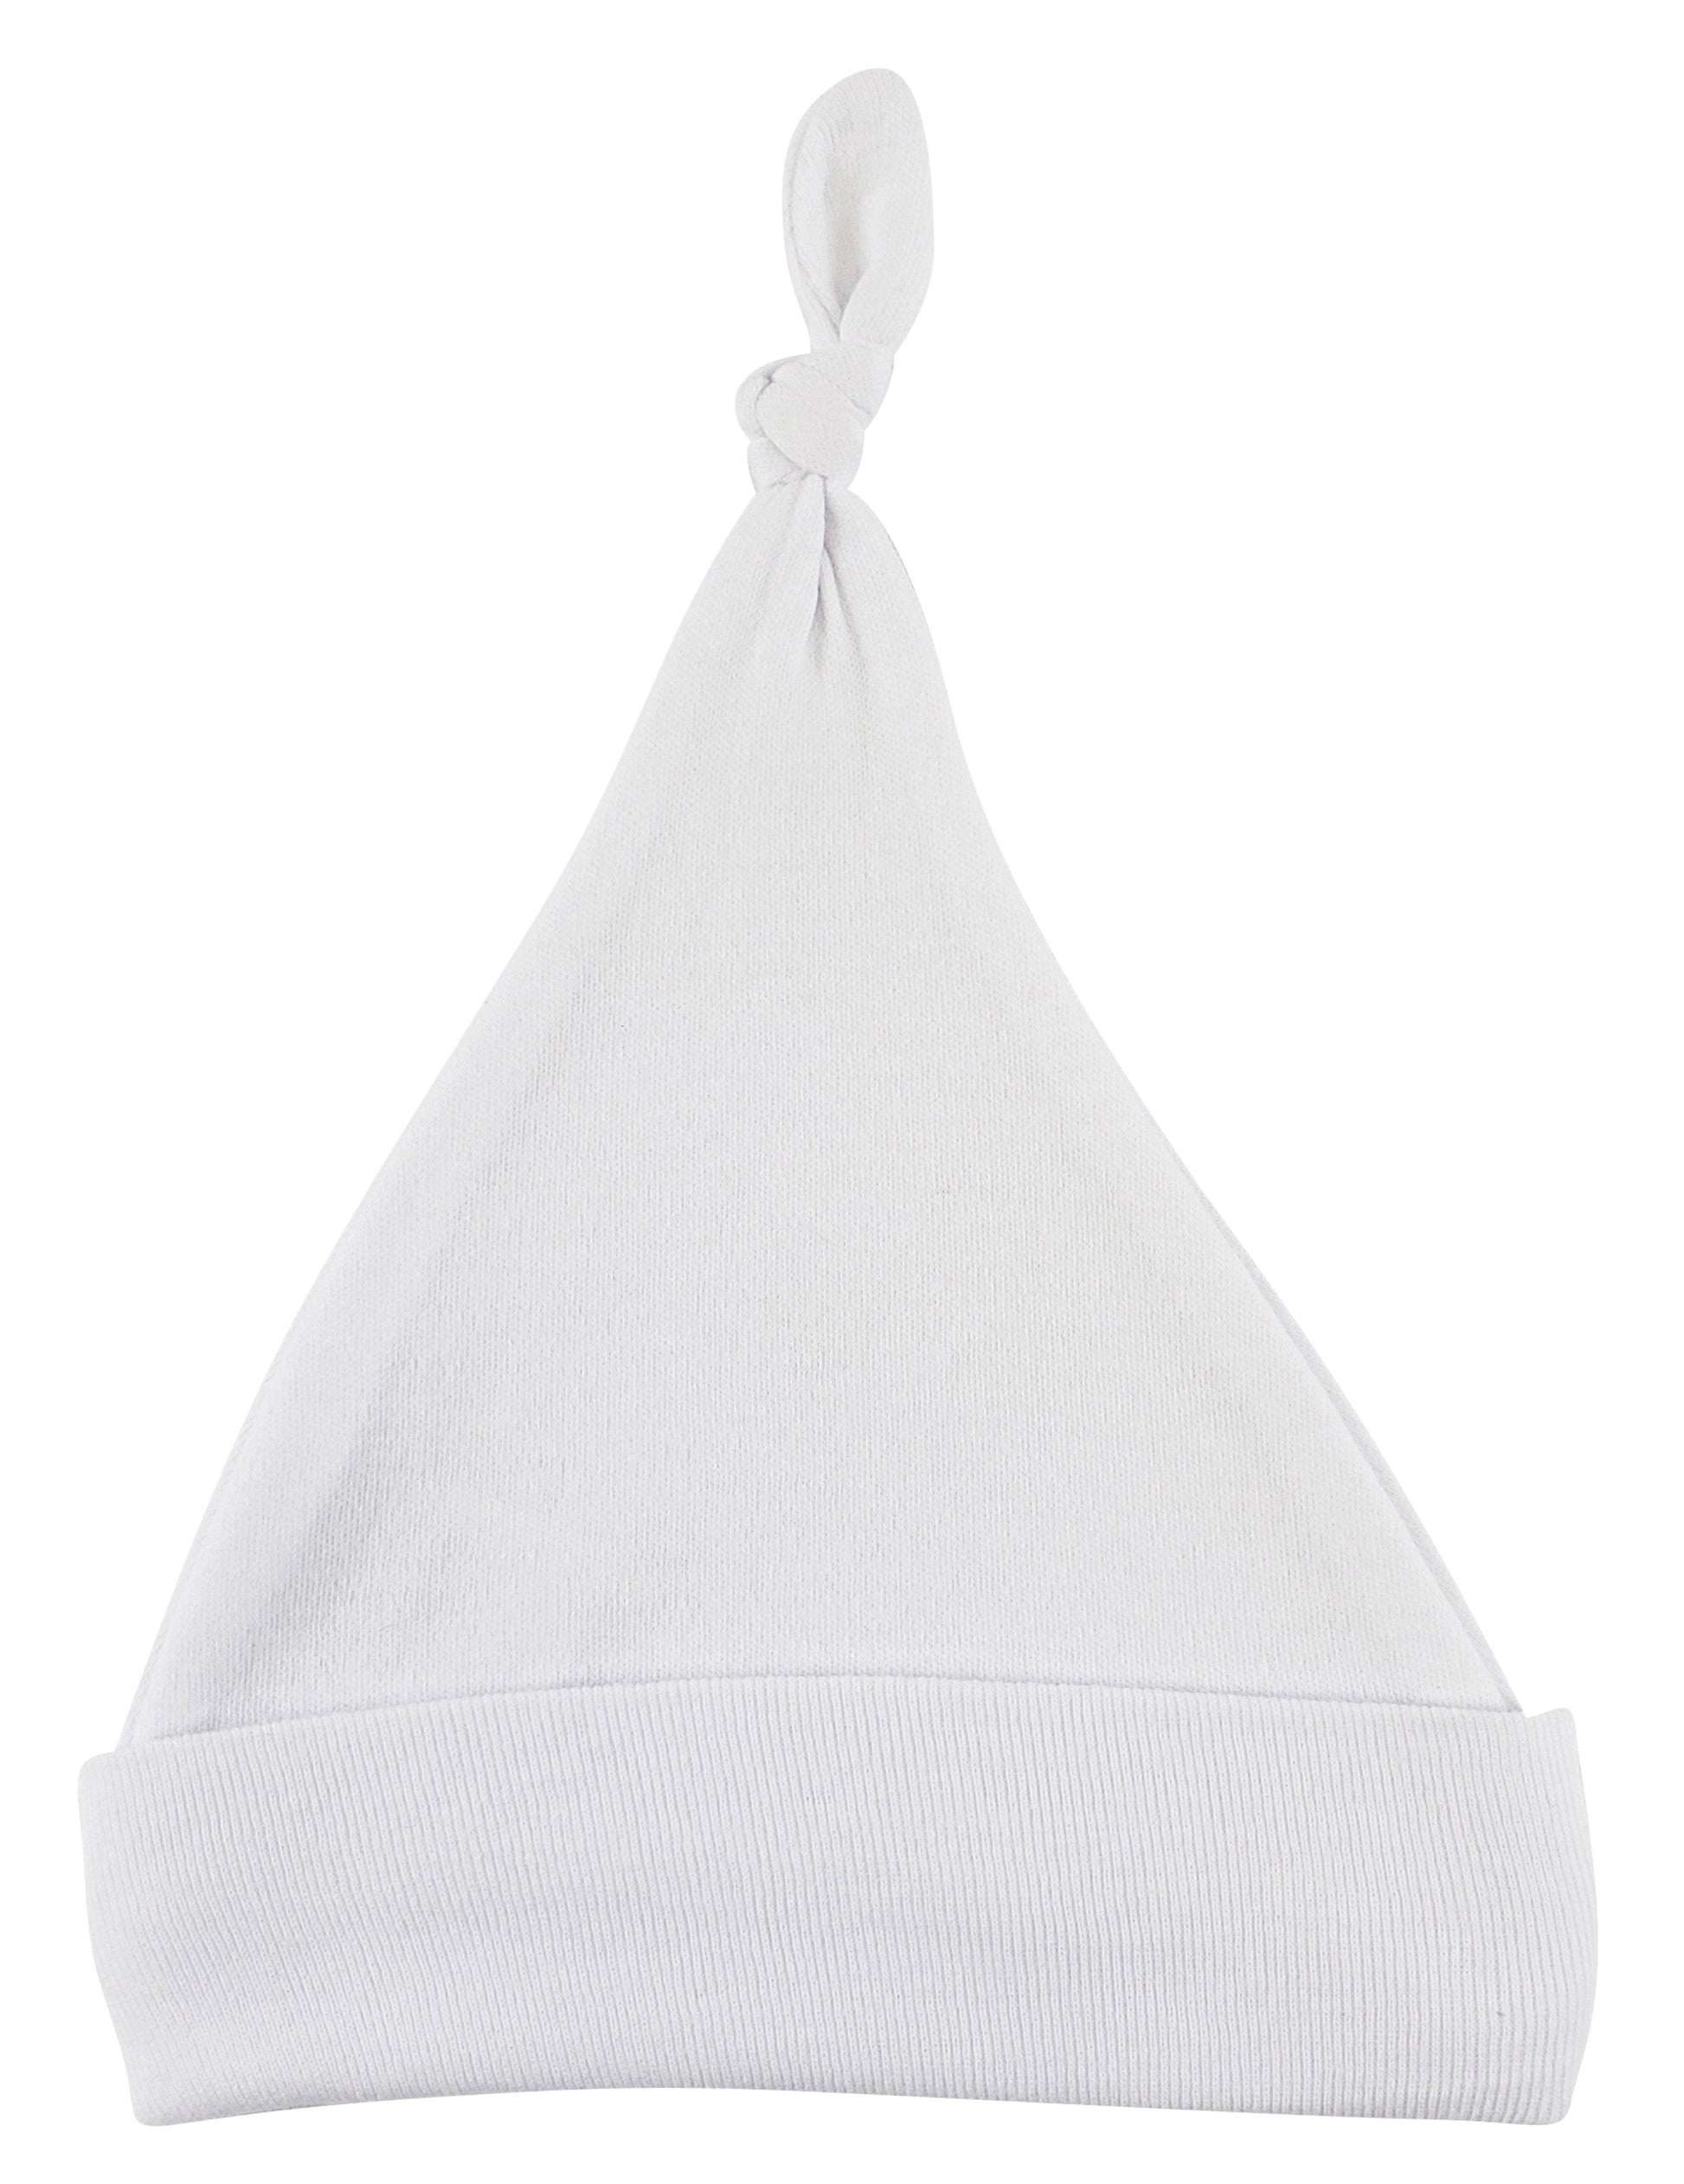 White Knotted Baby Cap 1101WHITE